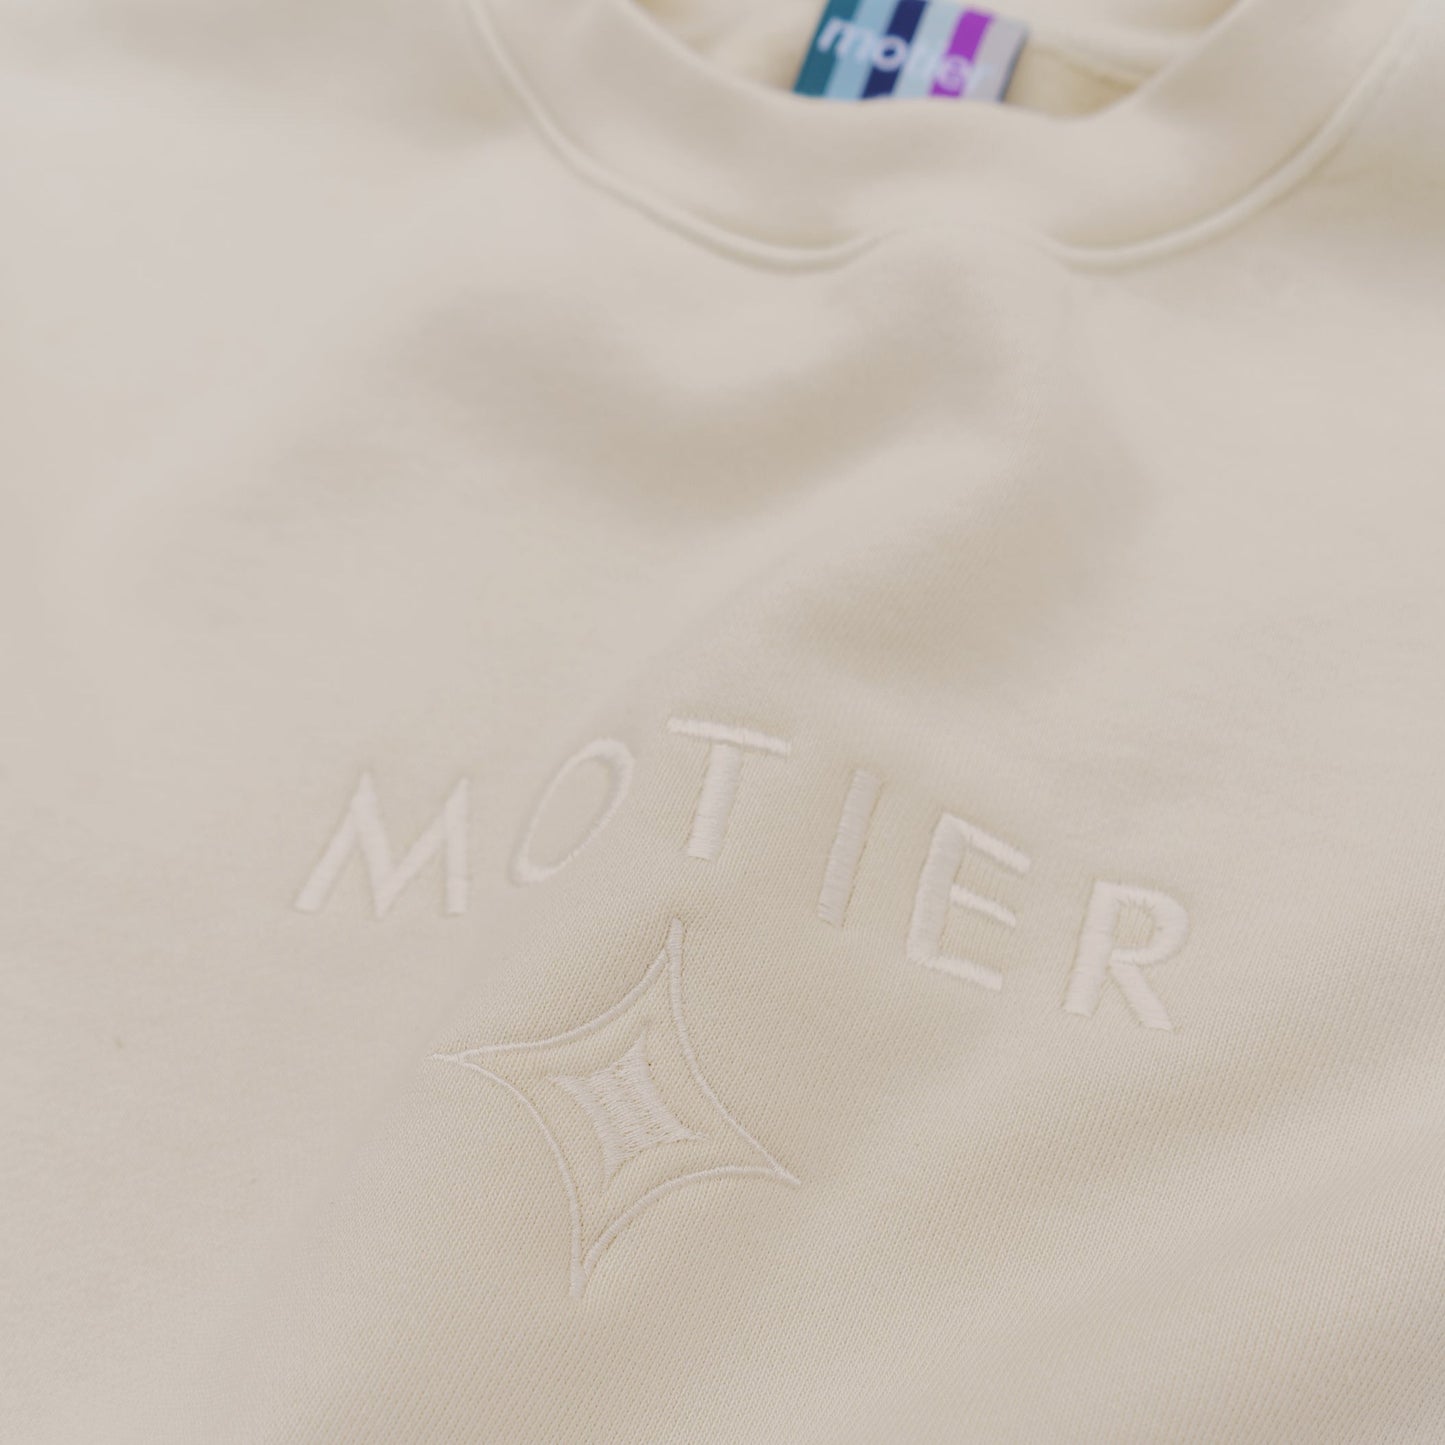 The Motier Astroid Embroidery Luxe Crewneck (Lily White)